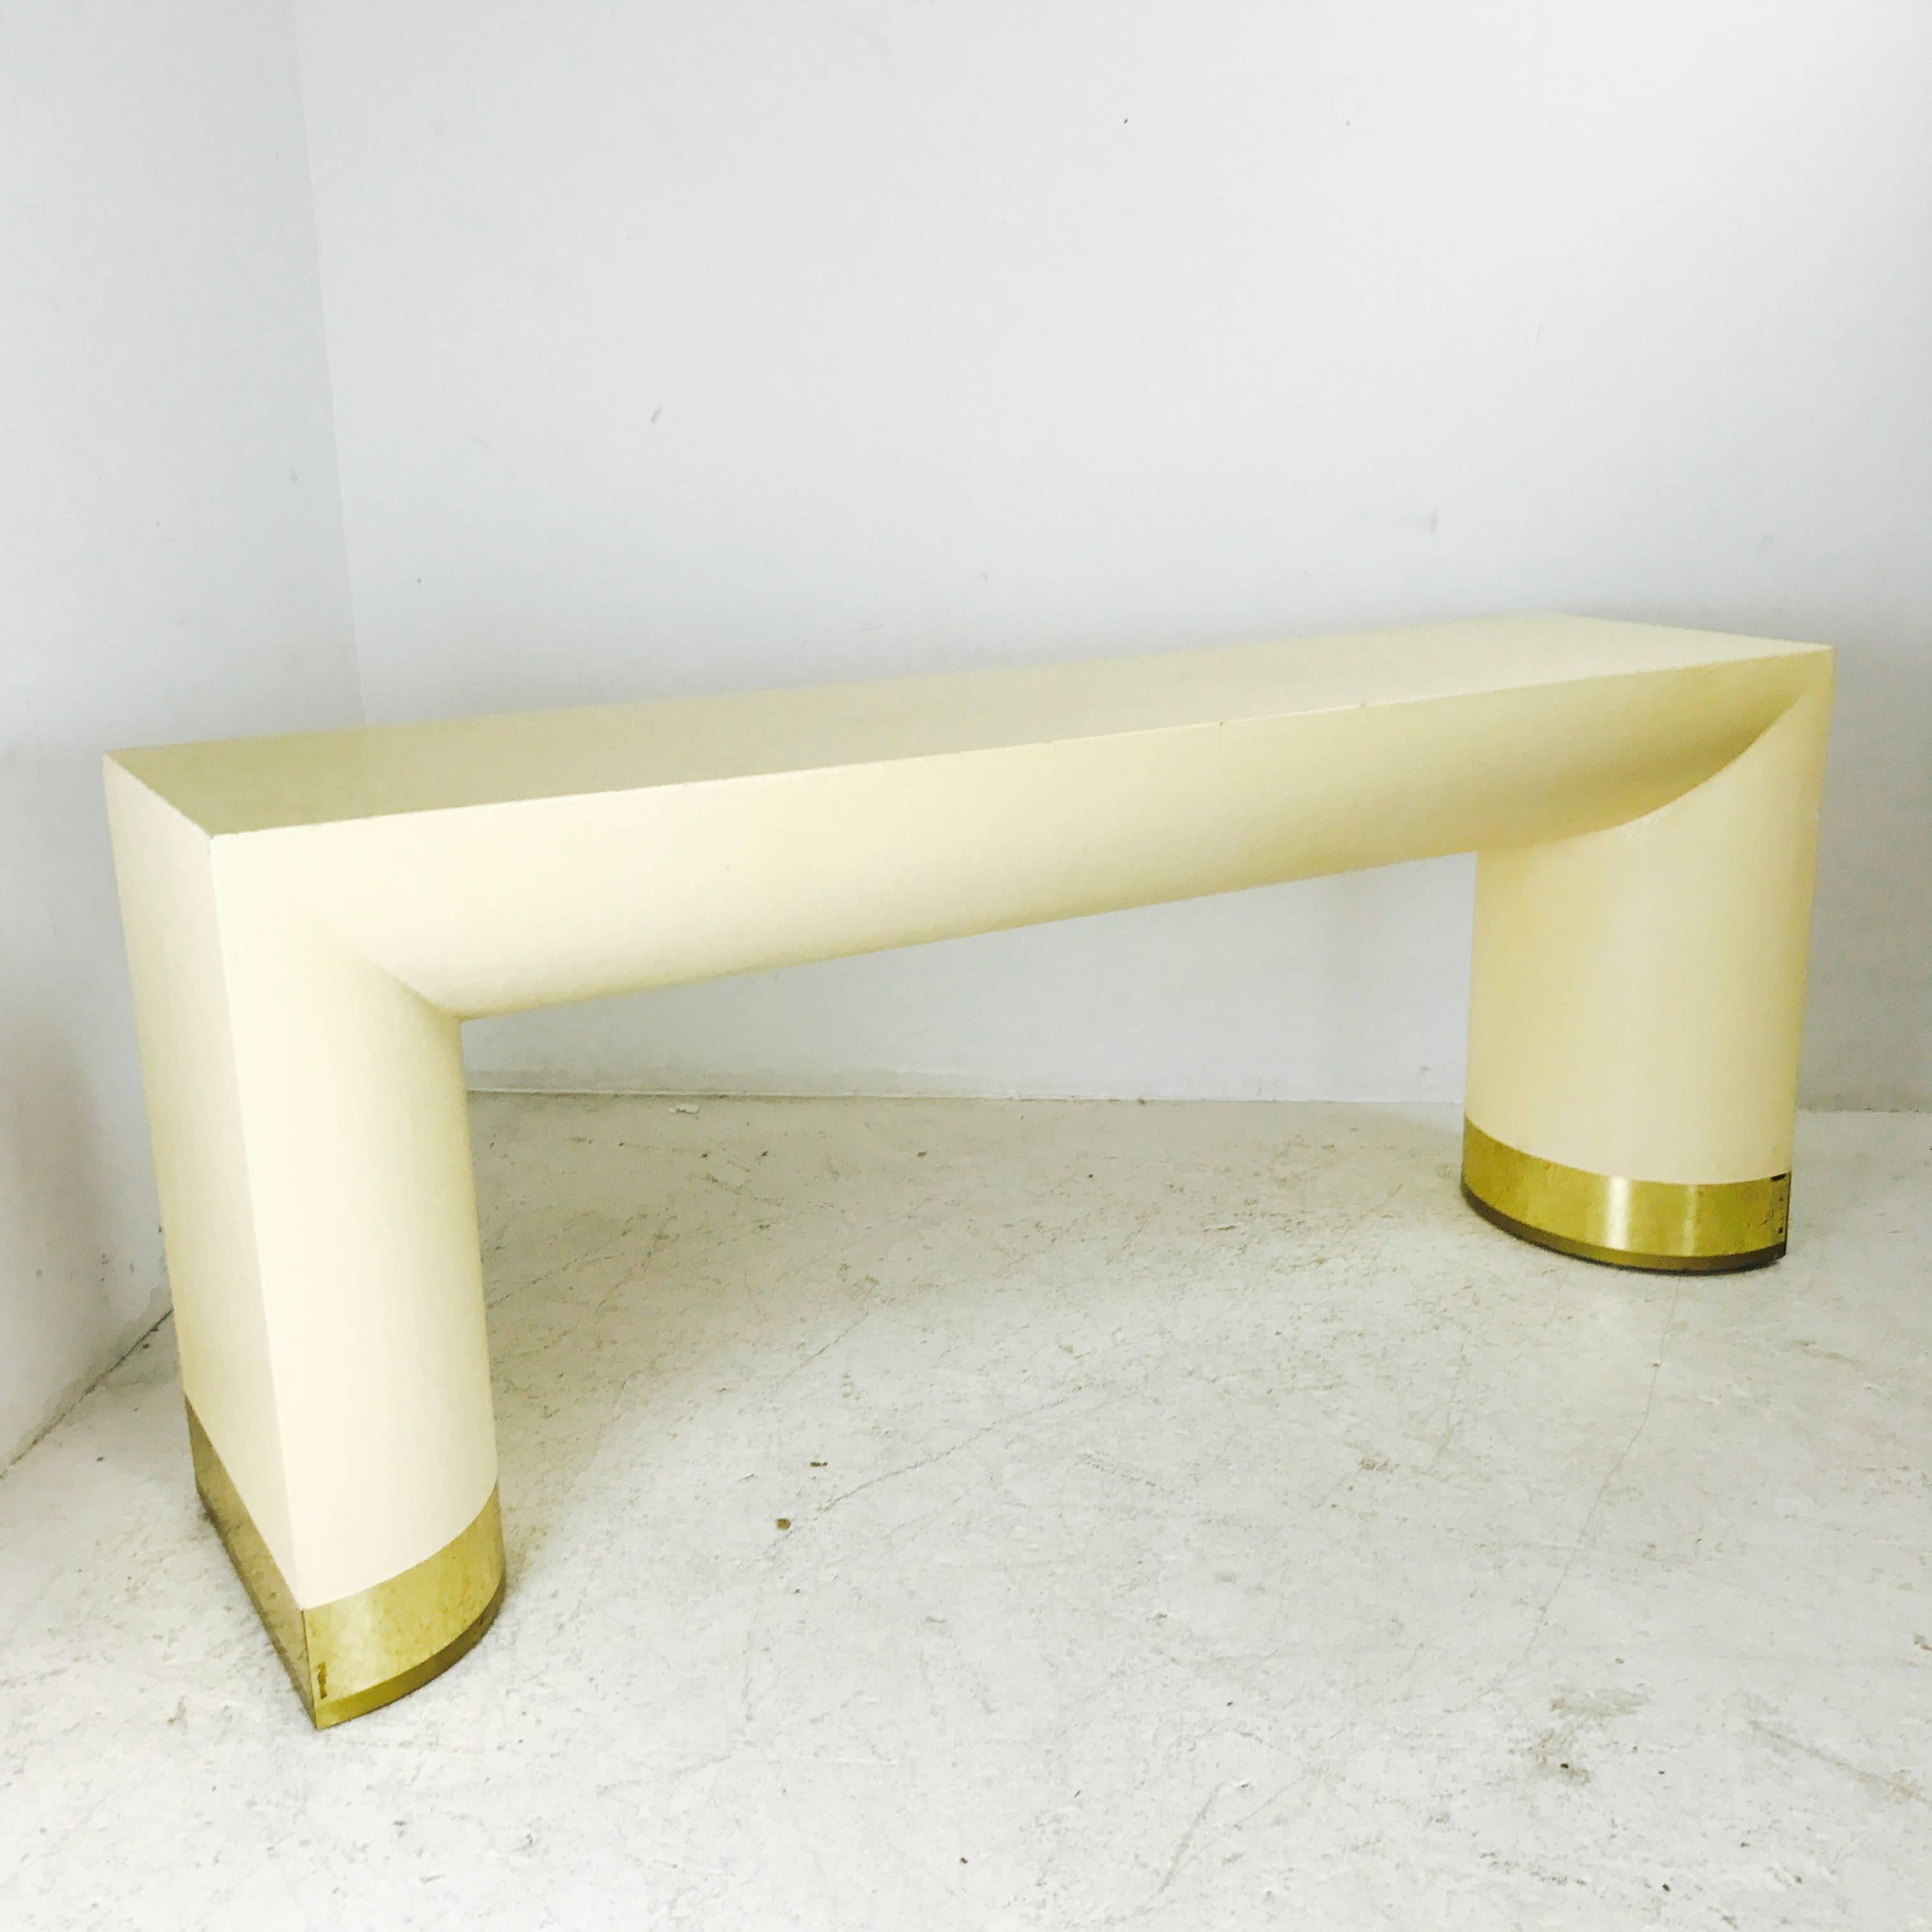 Grasscloth console table with brass feet in the Style of Karl Springer. Console is in found condition with wear from use and needs refinishing.

Dimensions: 72